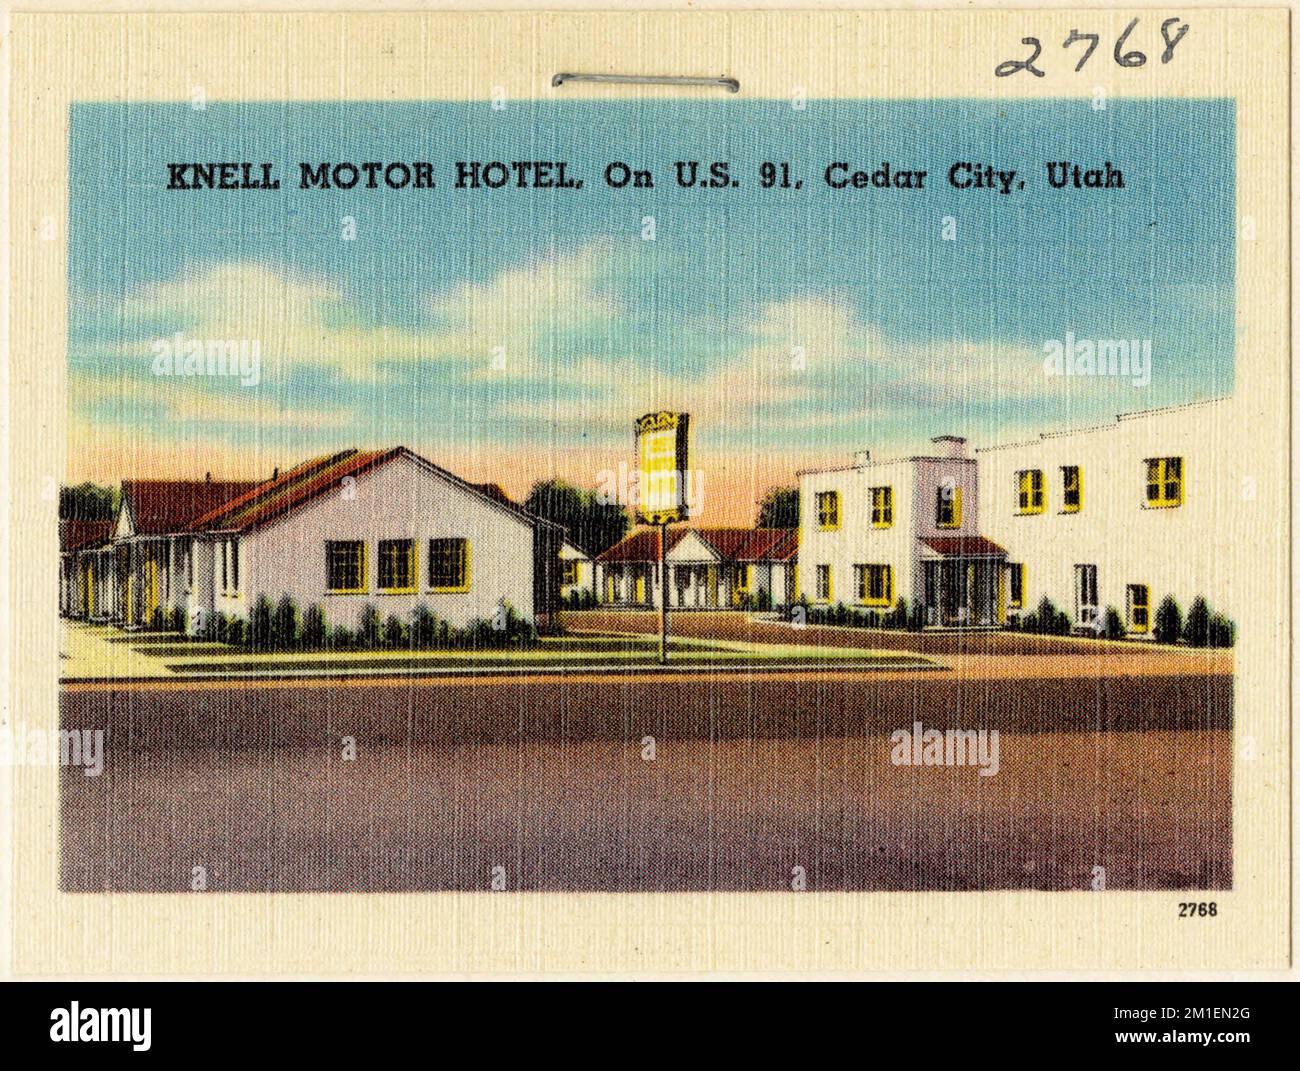 Knell Motor Hotel, on U.S. 91, Cedar City, Utah , Hotels, Tichnor Brothers Collection, postcards of the United States Stock Photo